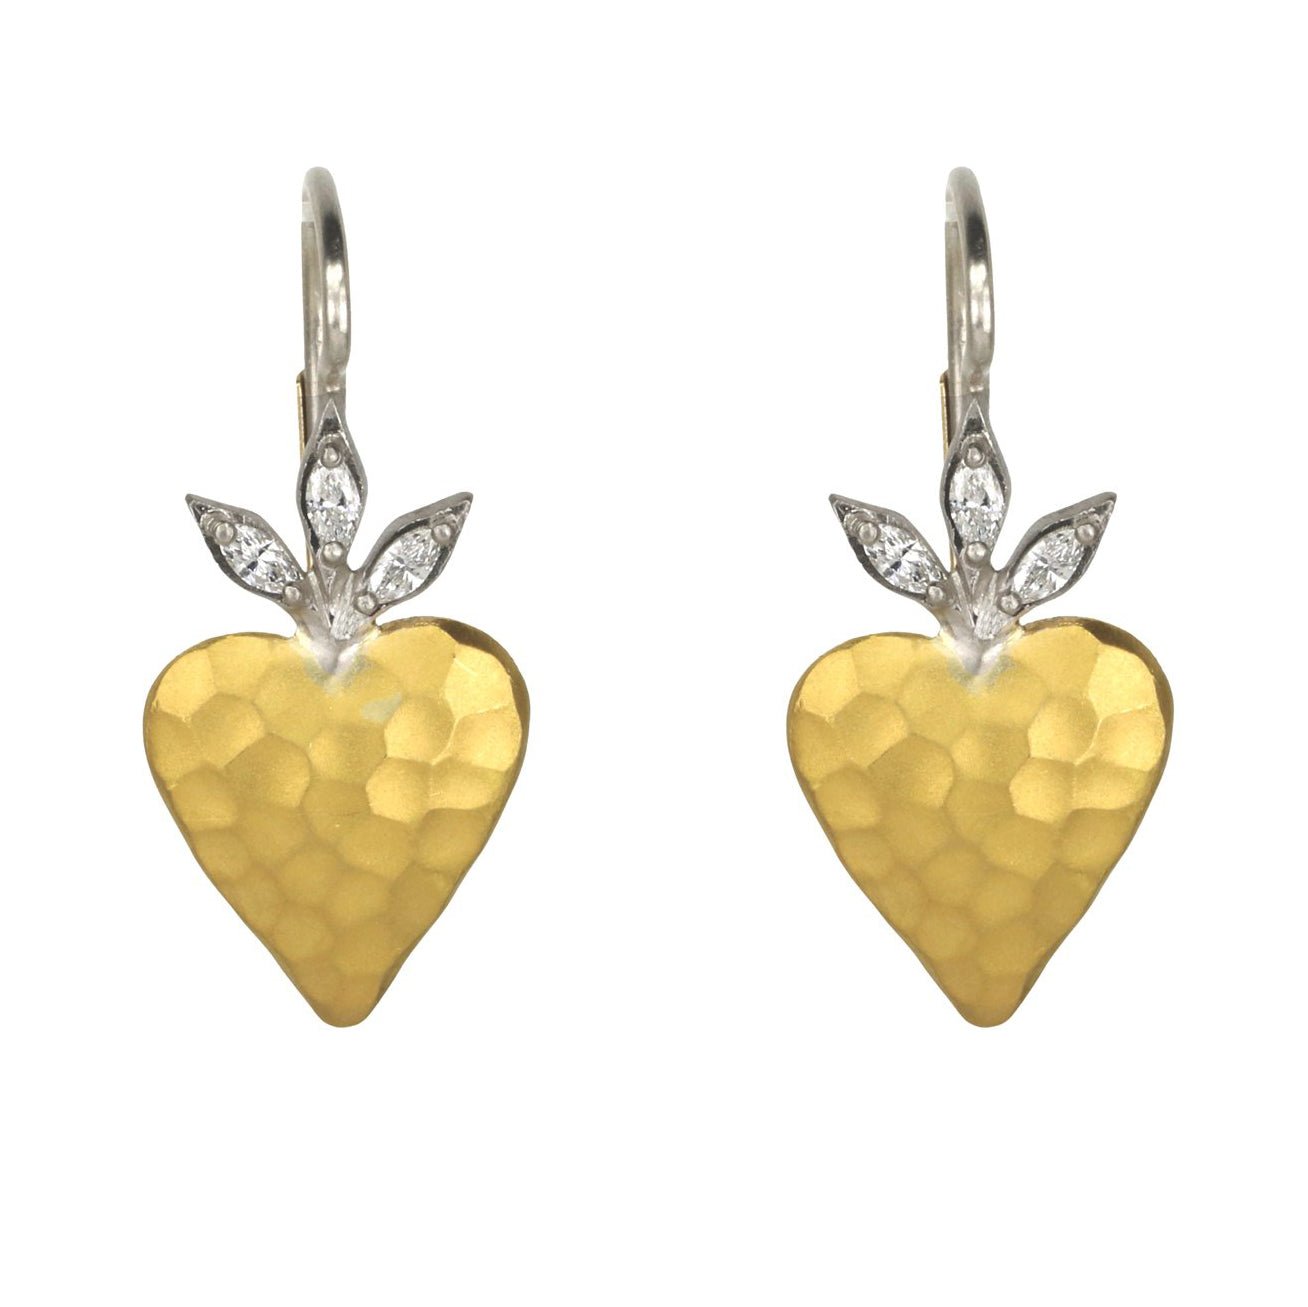 22K Gold Blossoming Heart Earrings with Diamond Details